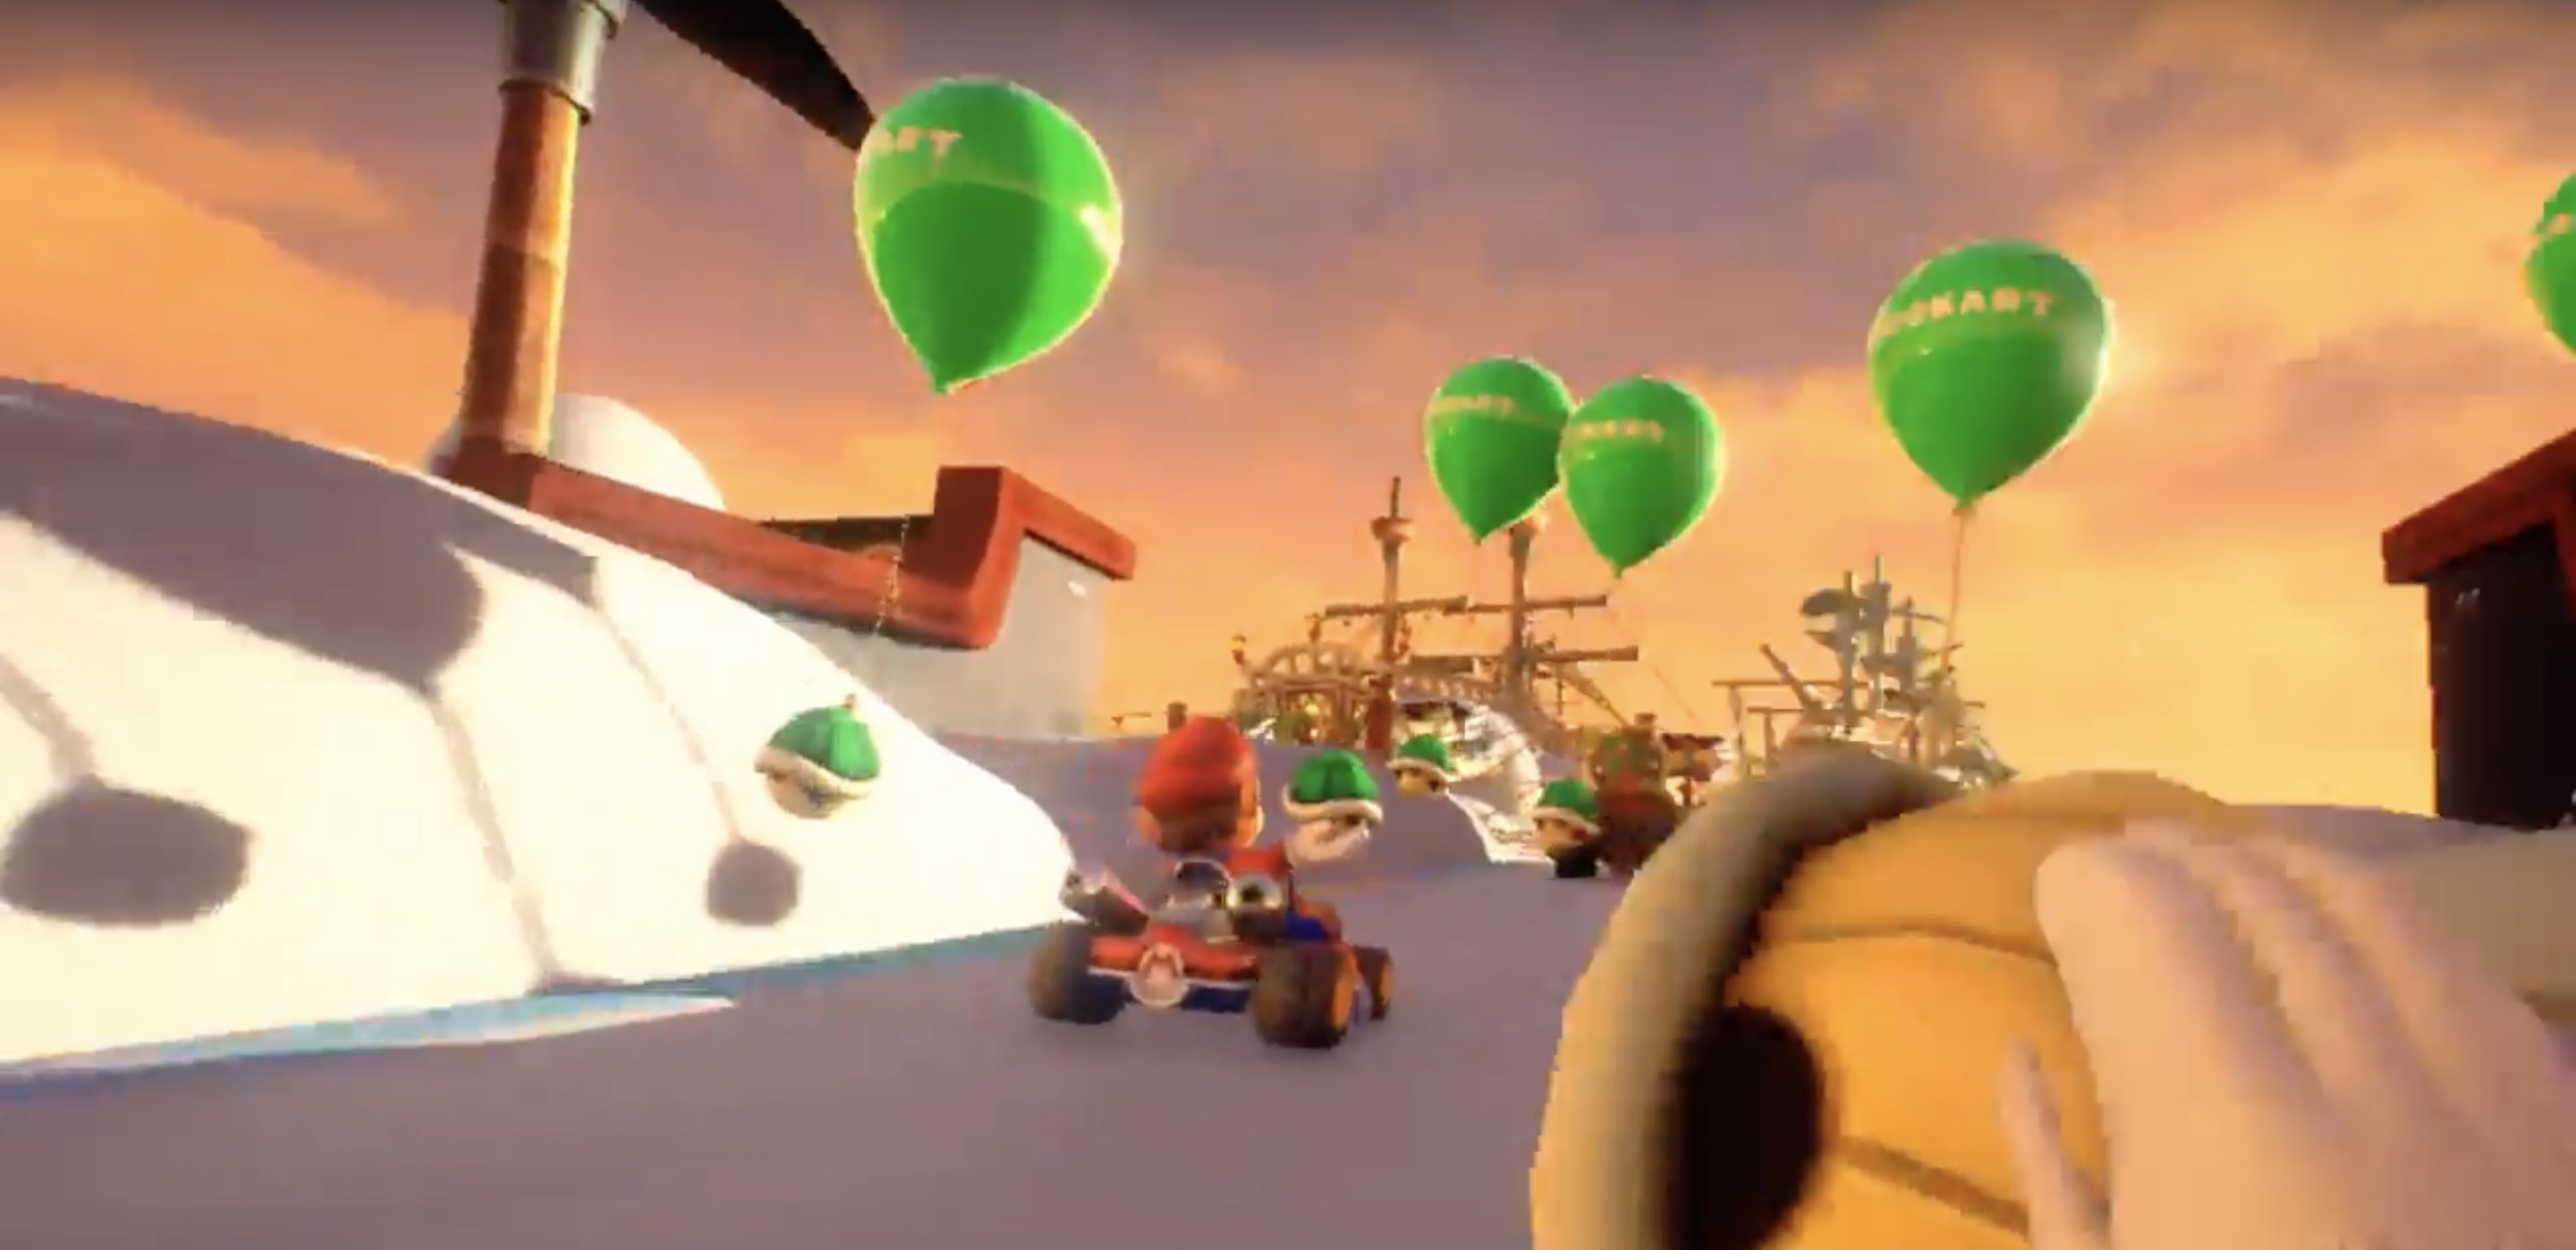 will-location-based-vr-games-like-mario-kart-vr-be-lost-to-history